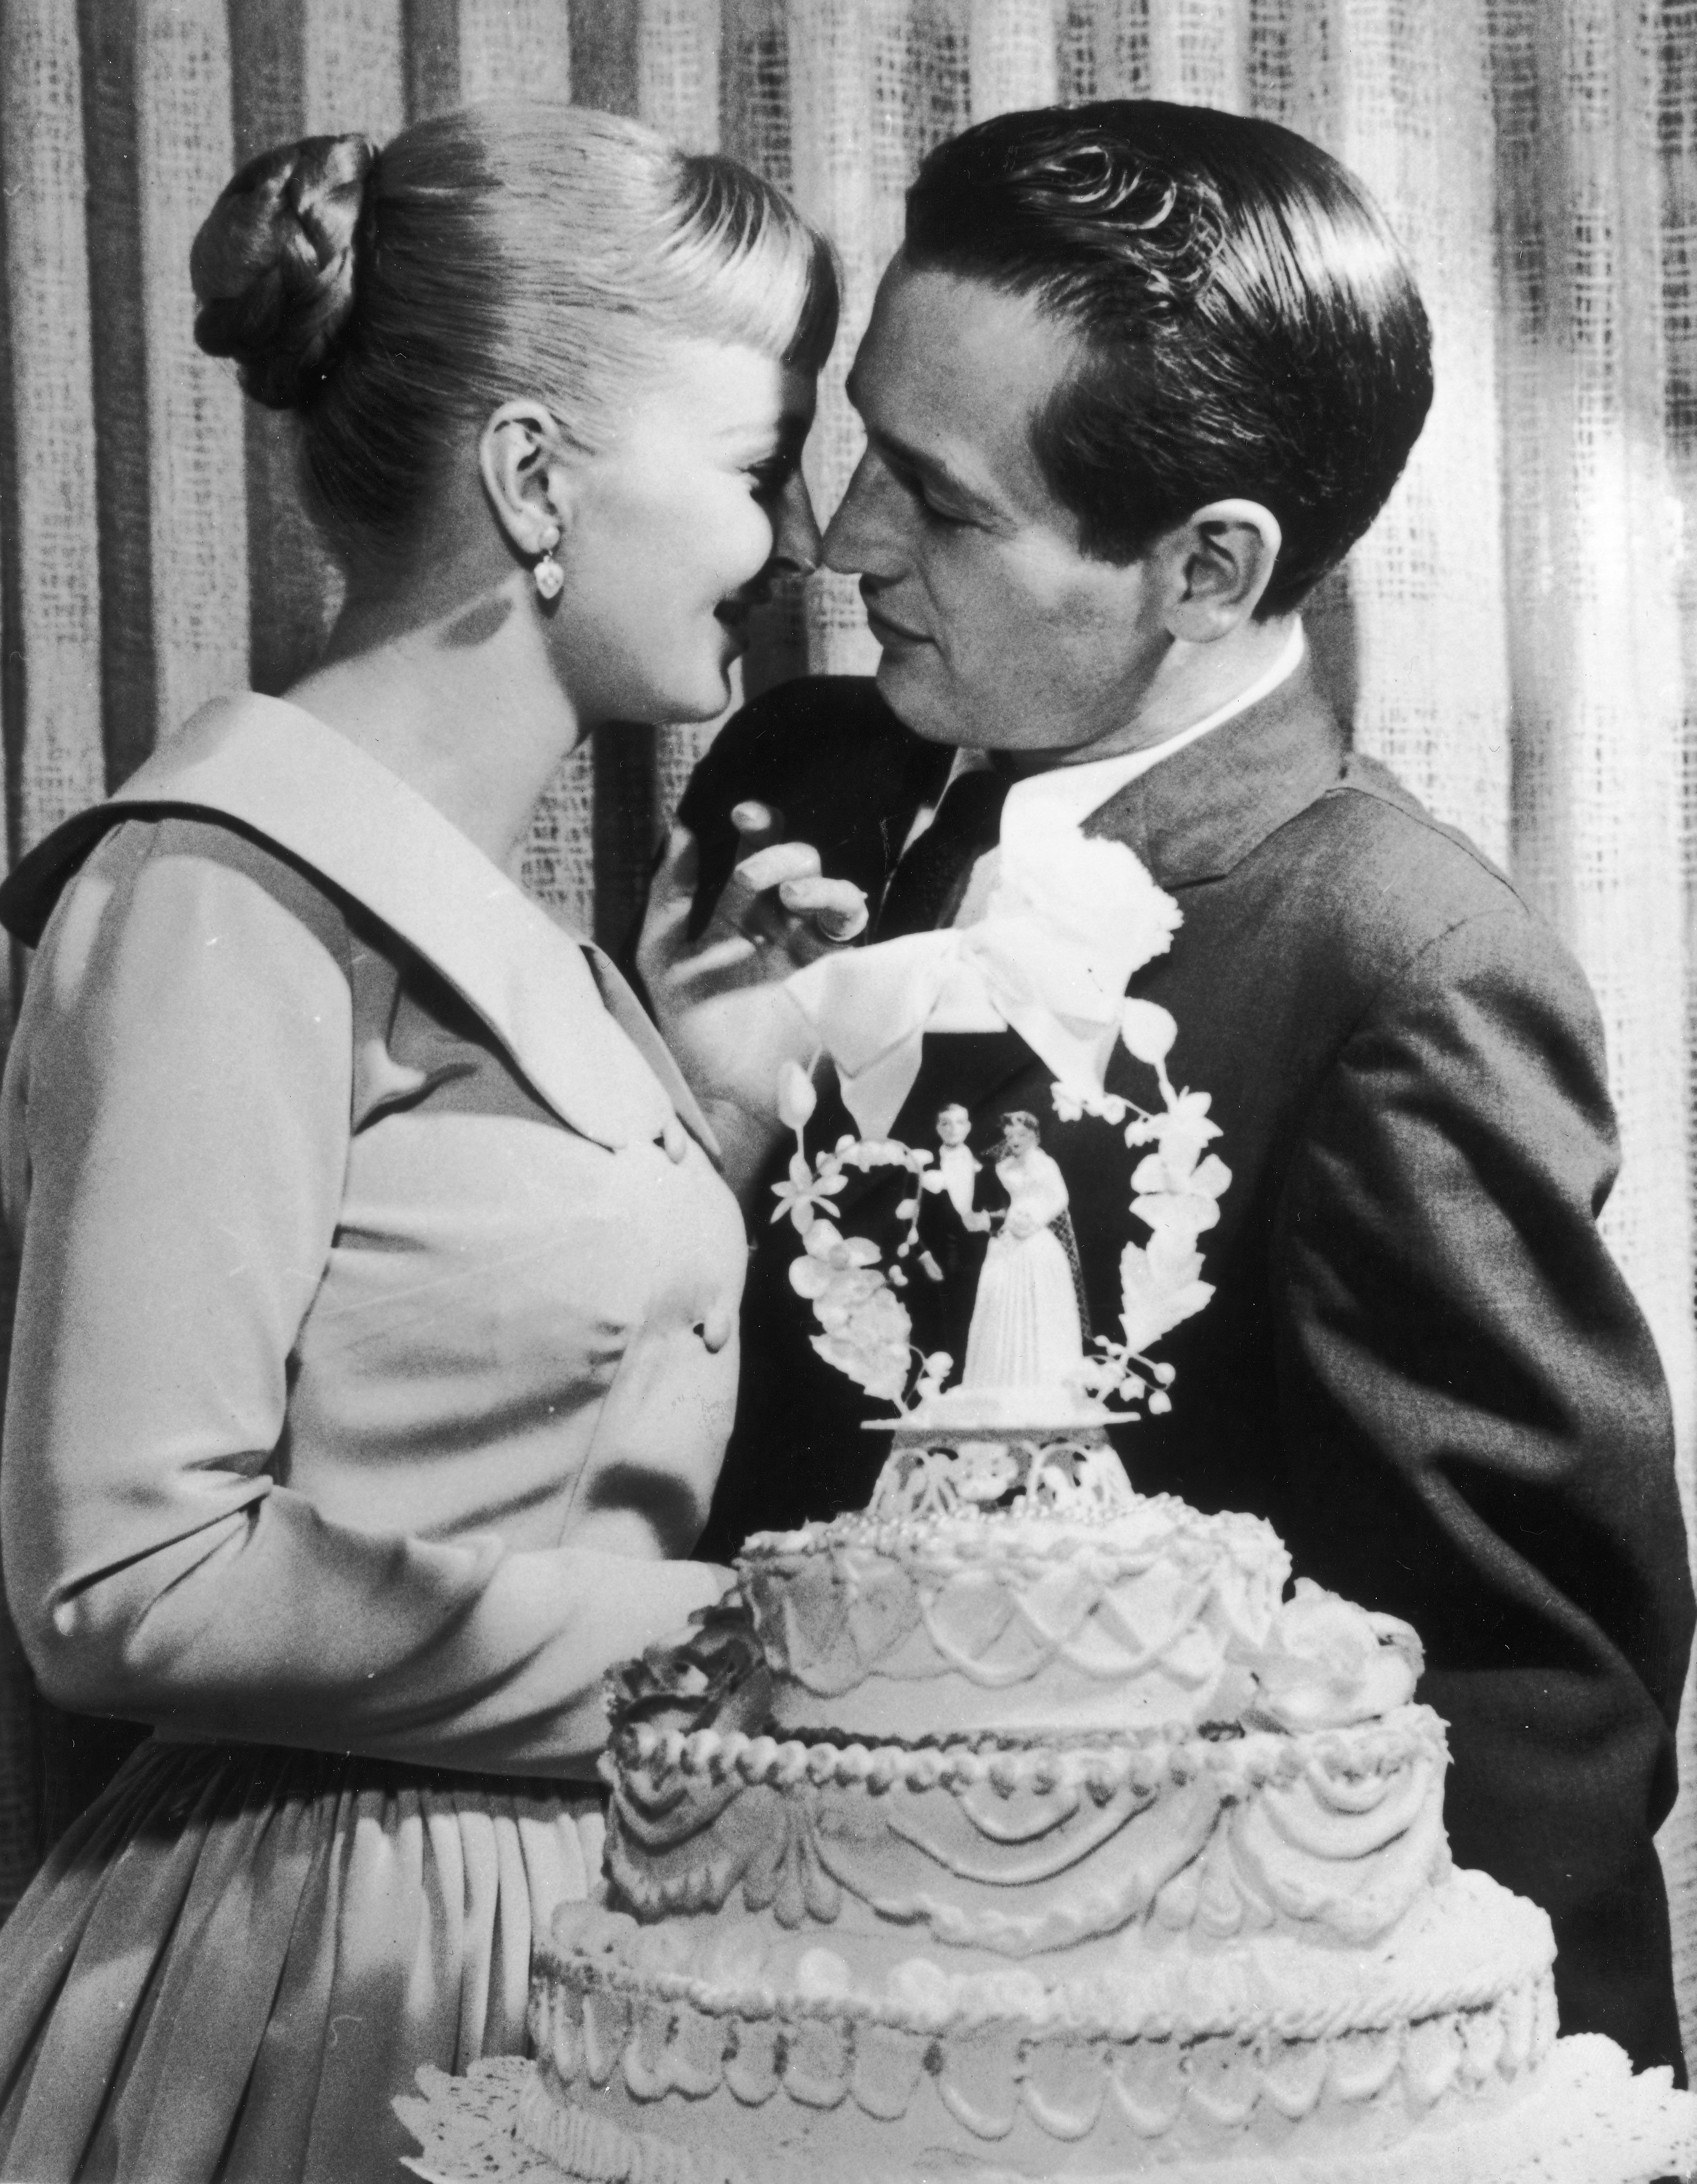 Paul Newman and Joanne Woodward at their wedding in Las Vegas in 1958 | Source: Getty Images